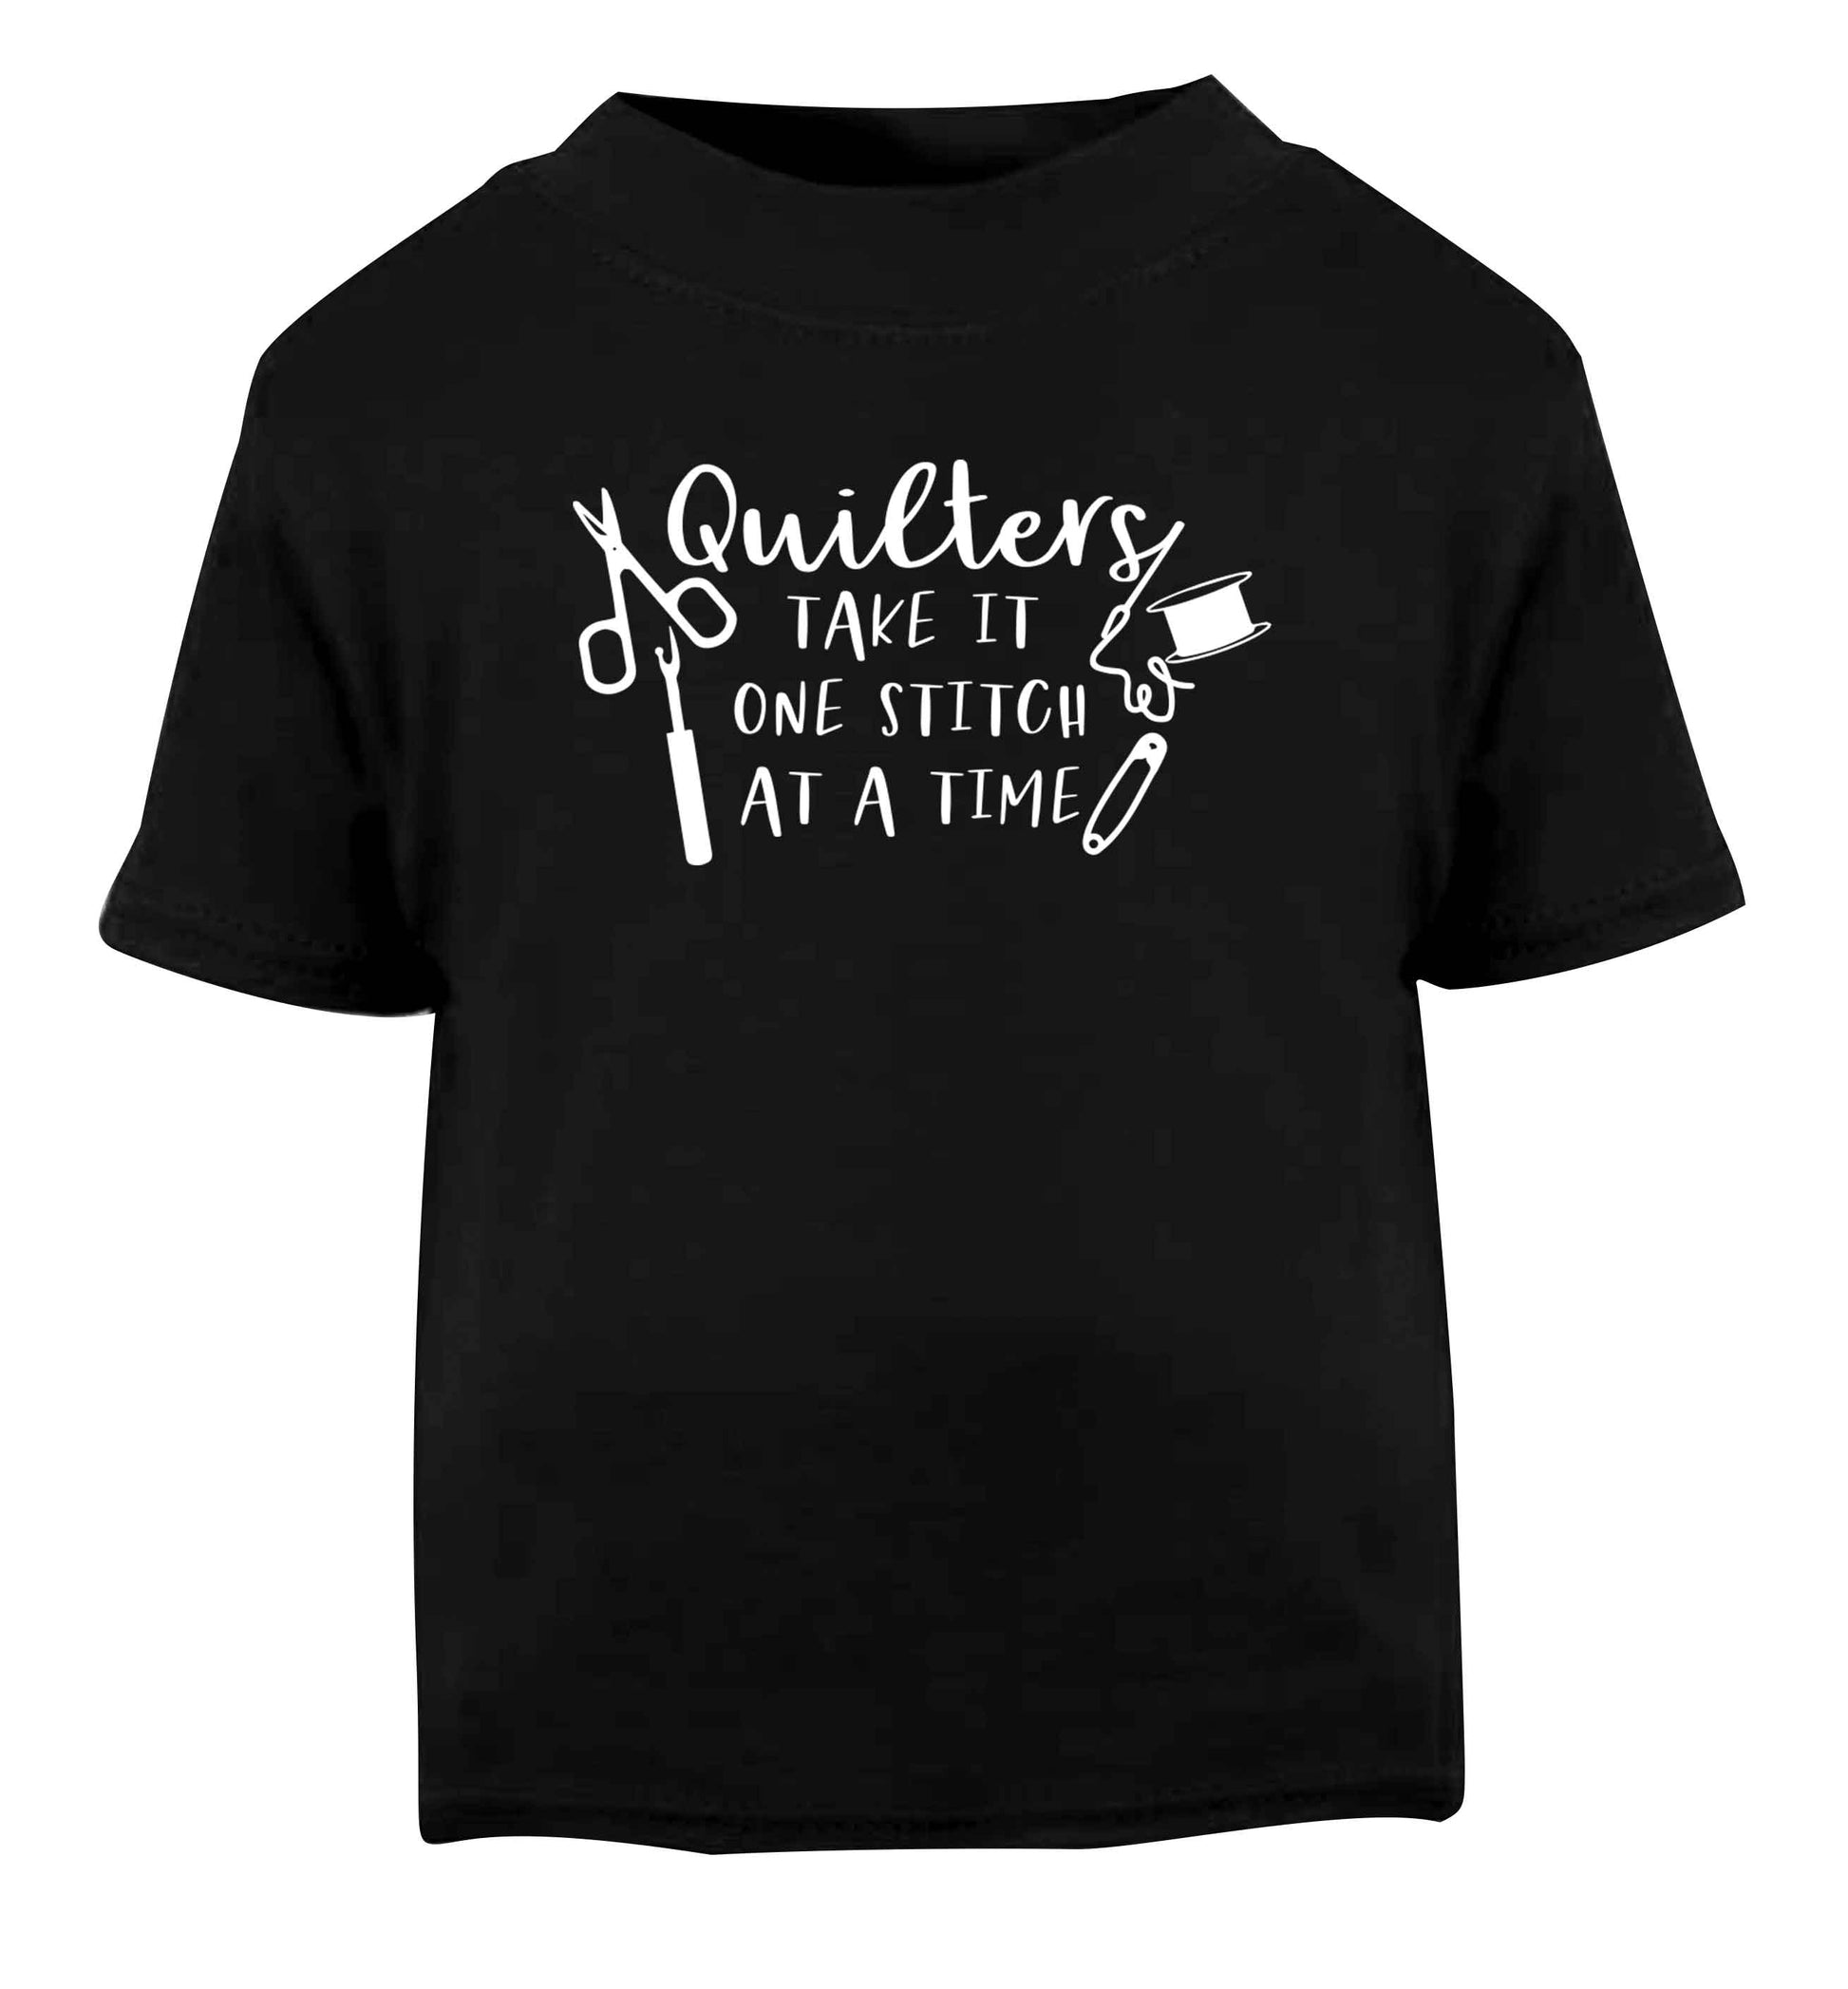 Quilters take it one stitch at a time  Black Baby Toddler Tshirt 2 years